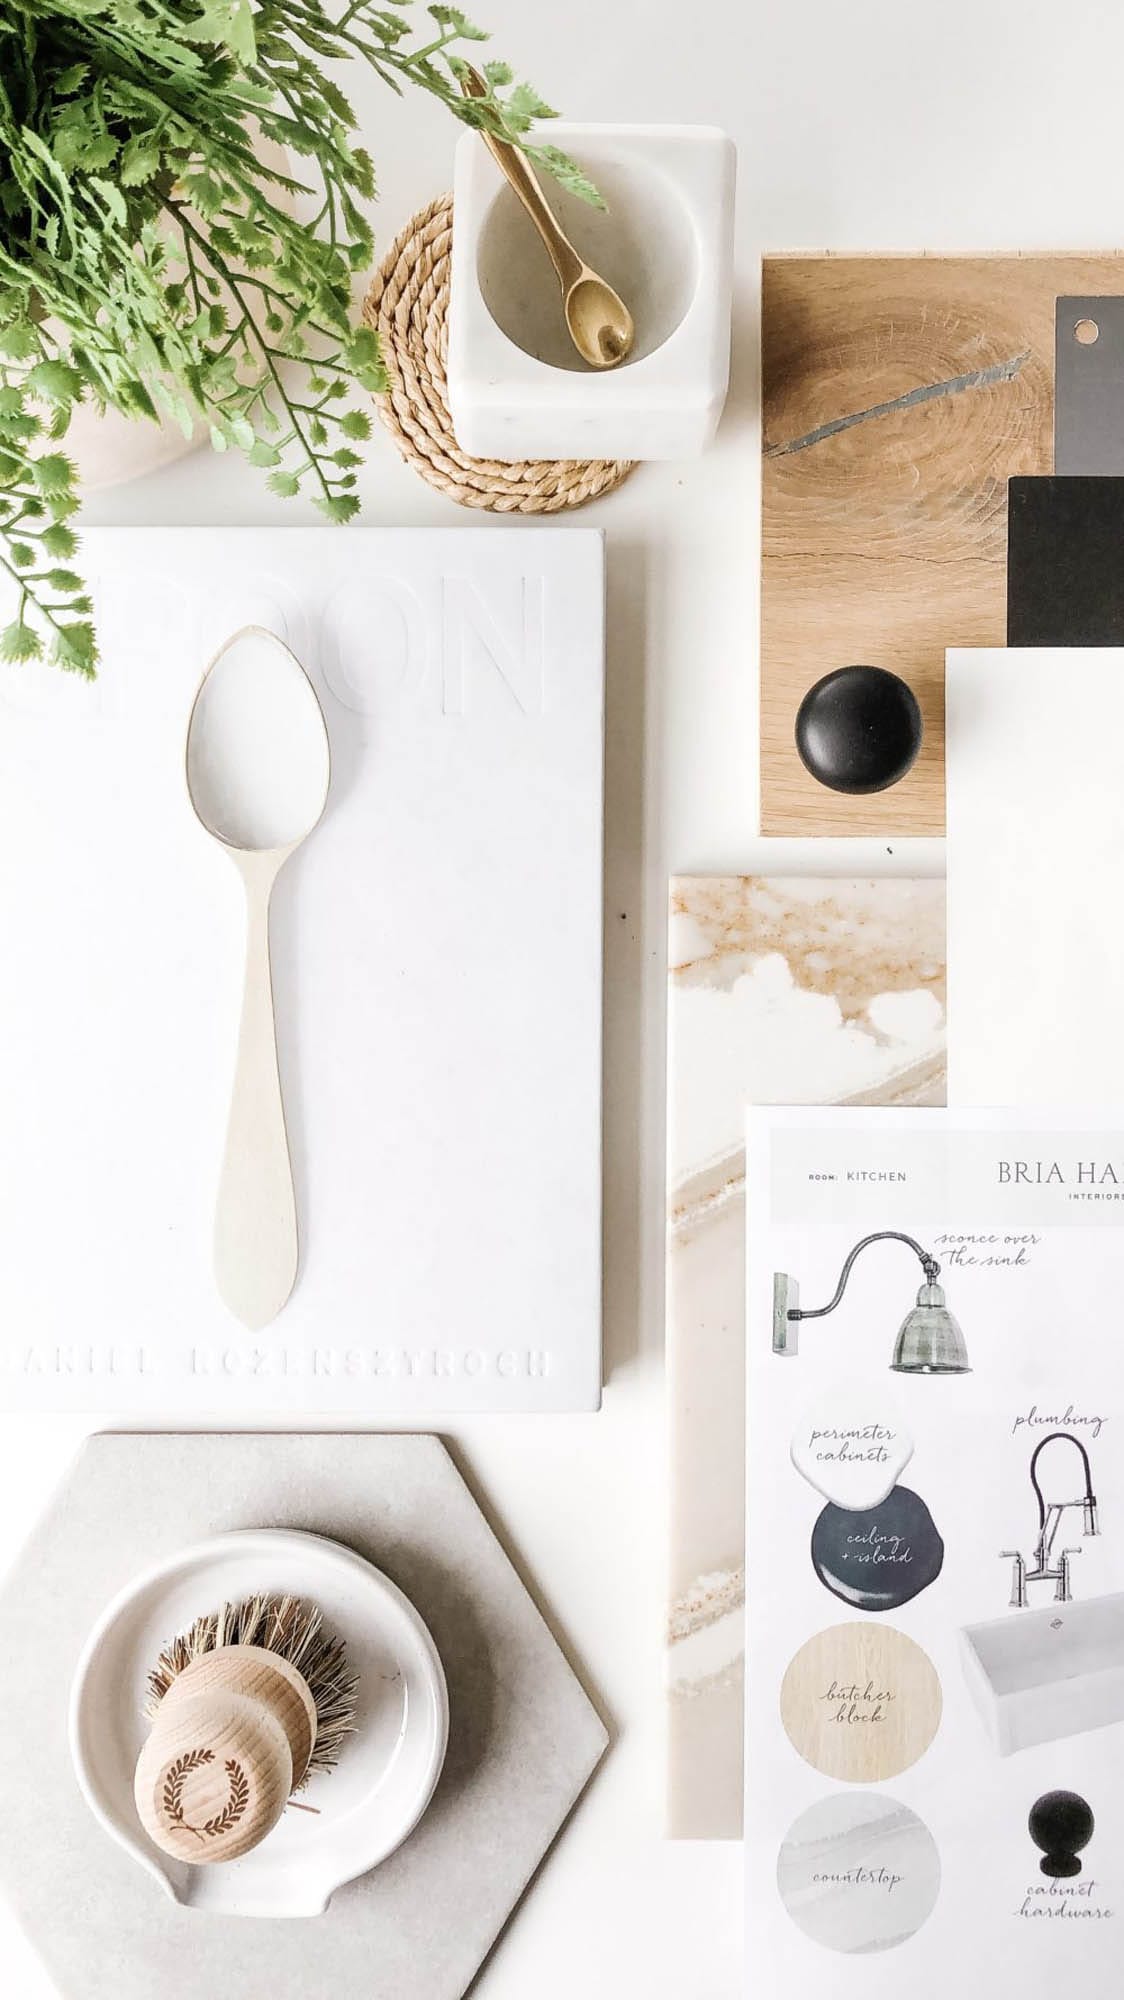 Kitchen Remodeling Q+A with Bria Hammel - The Tile Shop Blog